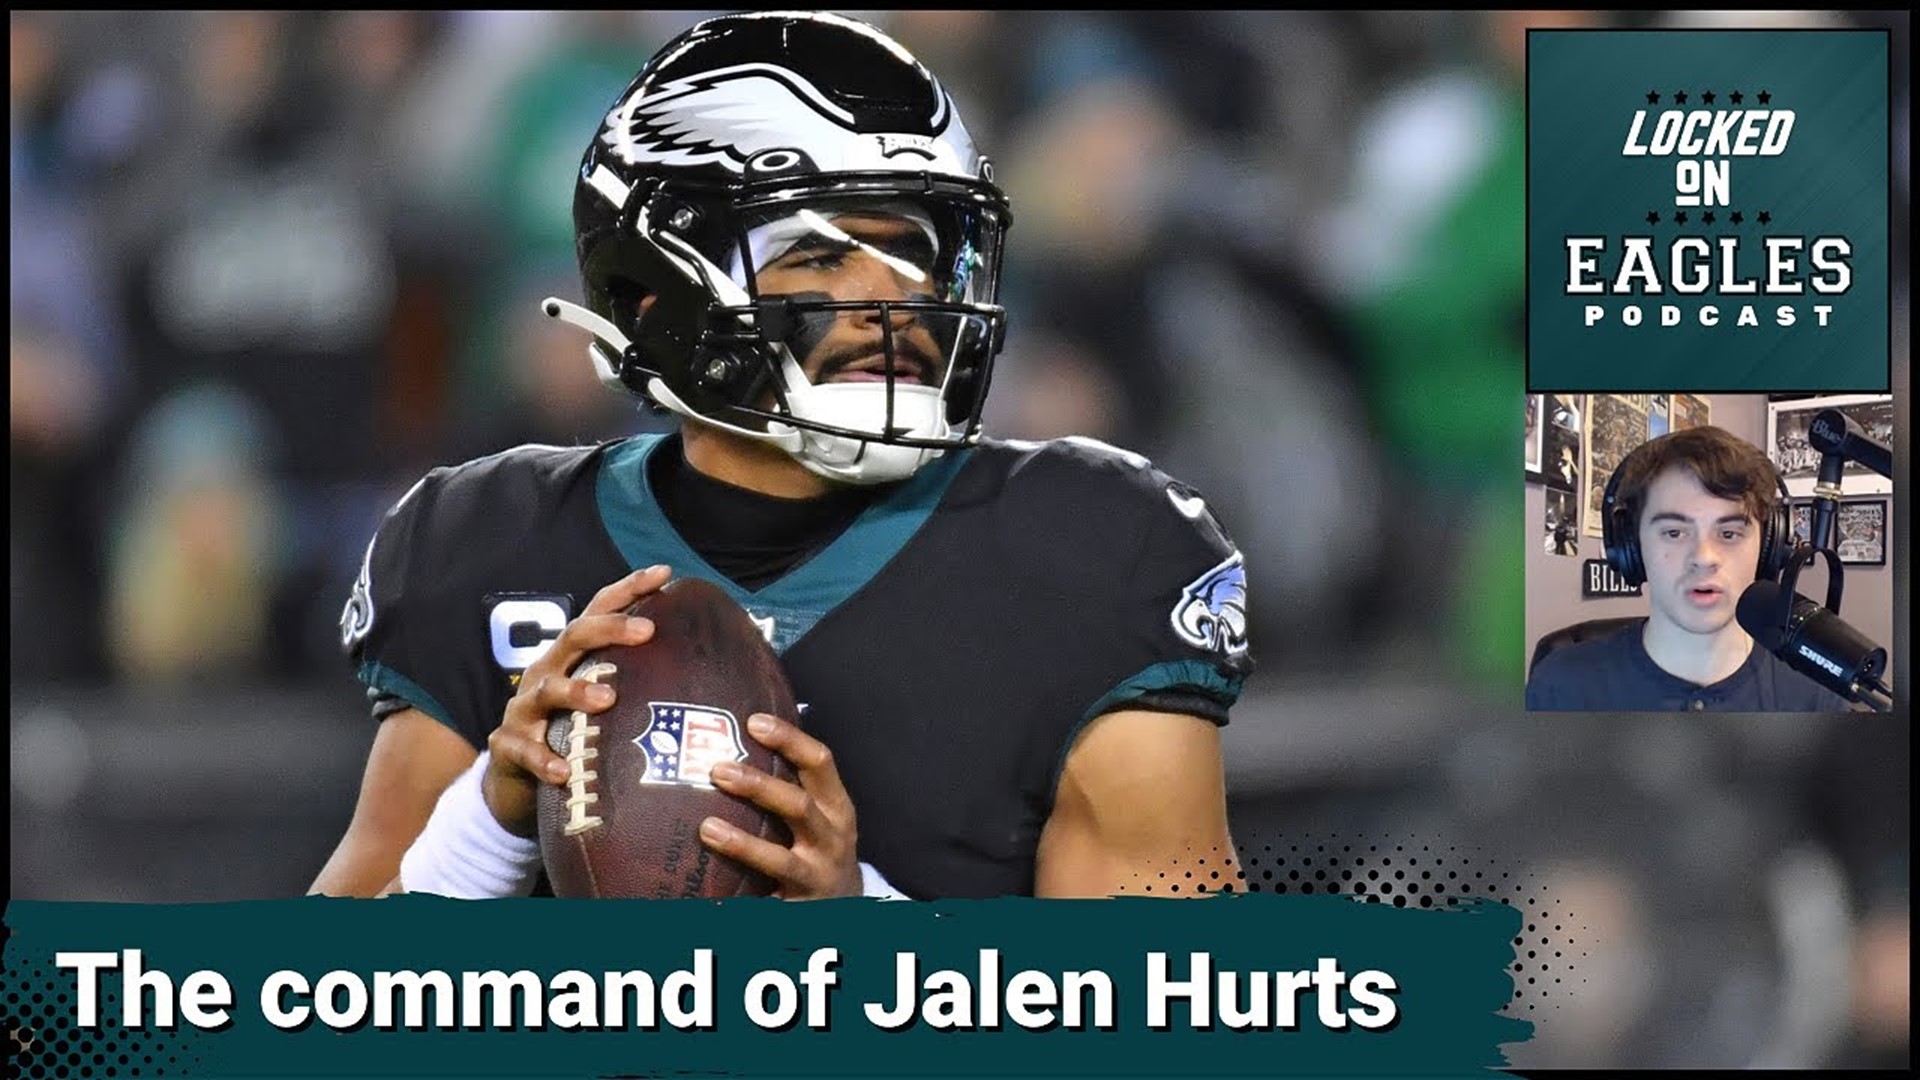 It wasn't a flashy performance by Philadelphia Eagles QB Jalen Hurts in the 22-16 win over the New York Giants to clinch the #1 seed and the NFC East title.